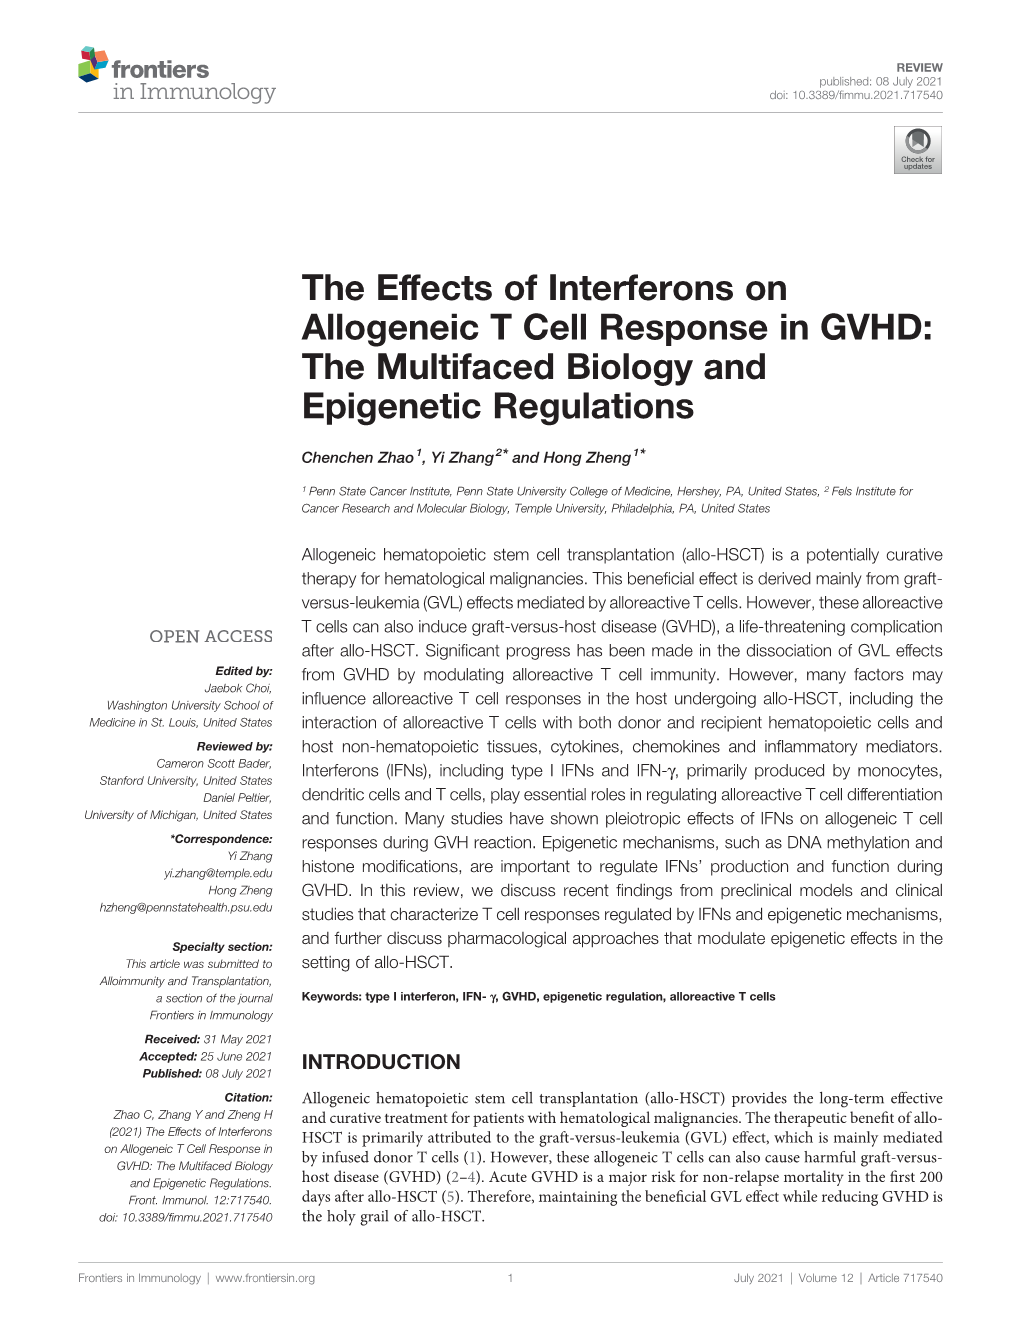 The Effects of Interferons on Allogeneic T Cell Response in GVHD: the Multifaced Biology and Epigenetic Regulations